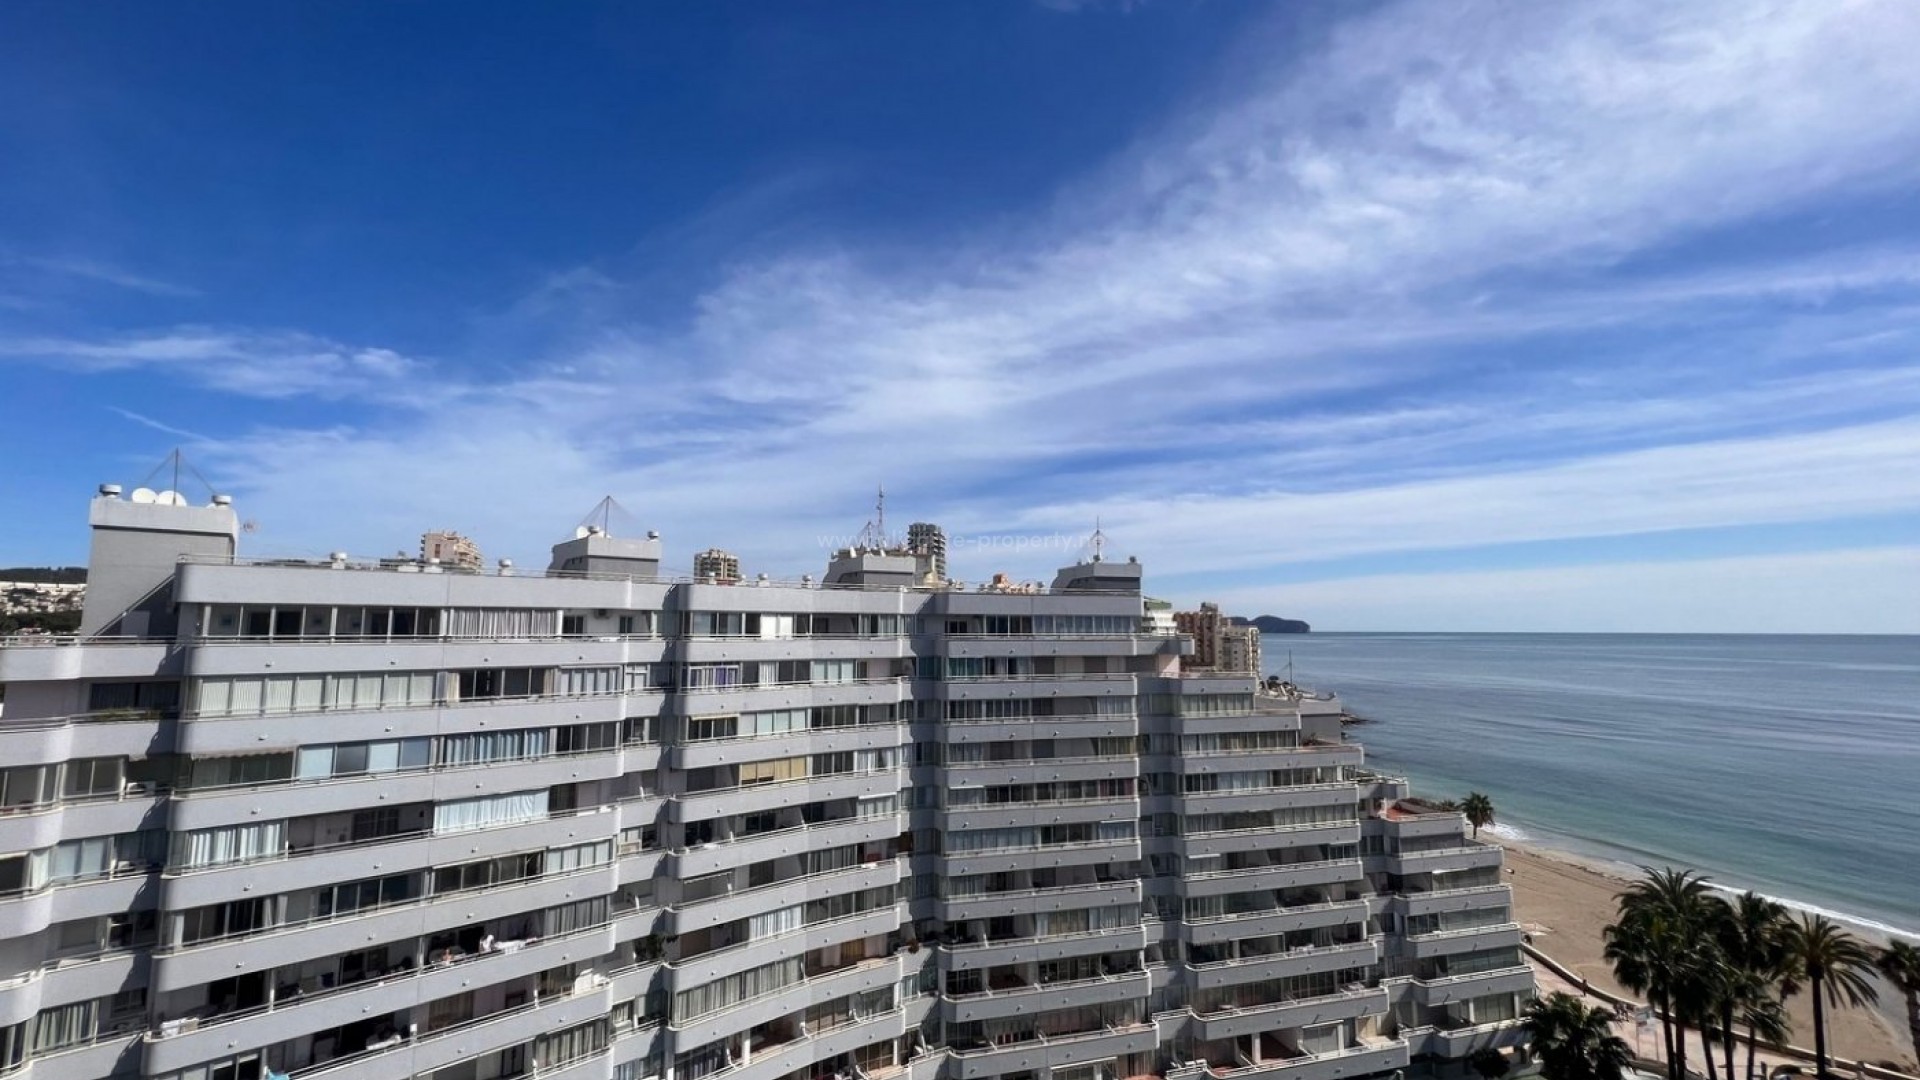 Top apartments/penthouse in Calpe with sea view, 3 bedrooms, 2 bathrooms, large terrace with fantastic views, common area with pool and hot tub